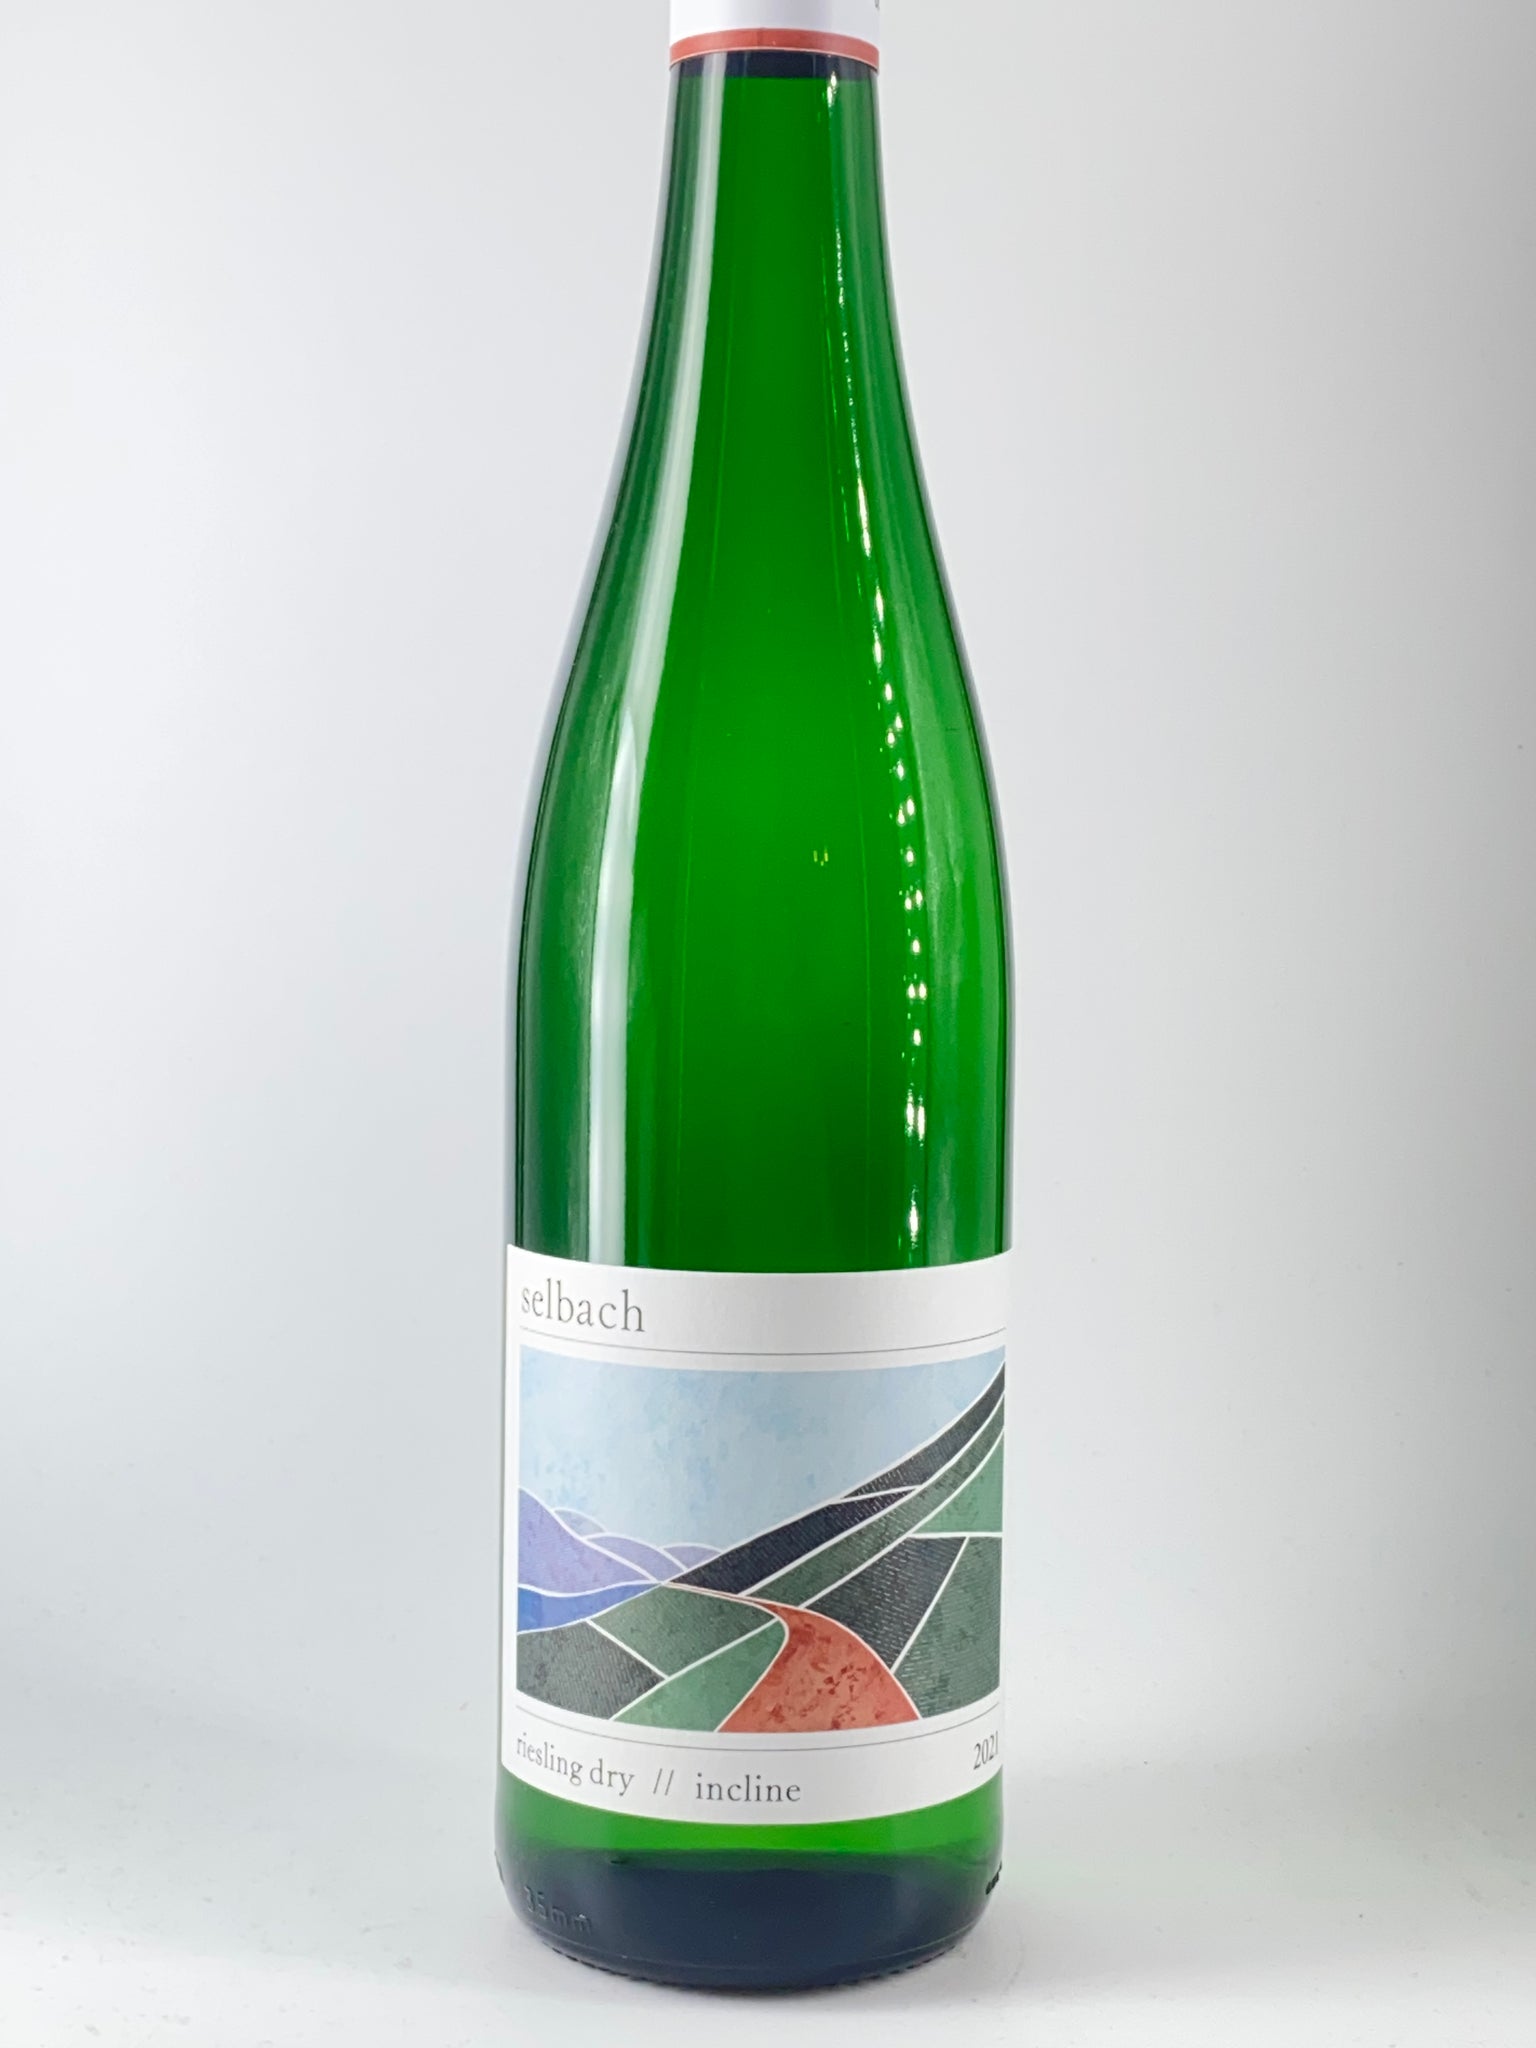 Riesling, Selbach Incline